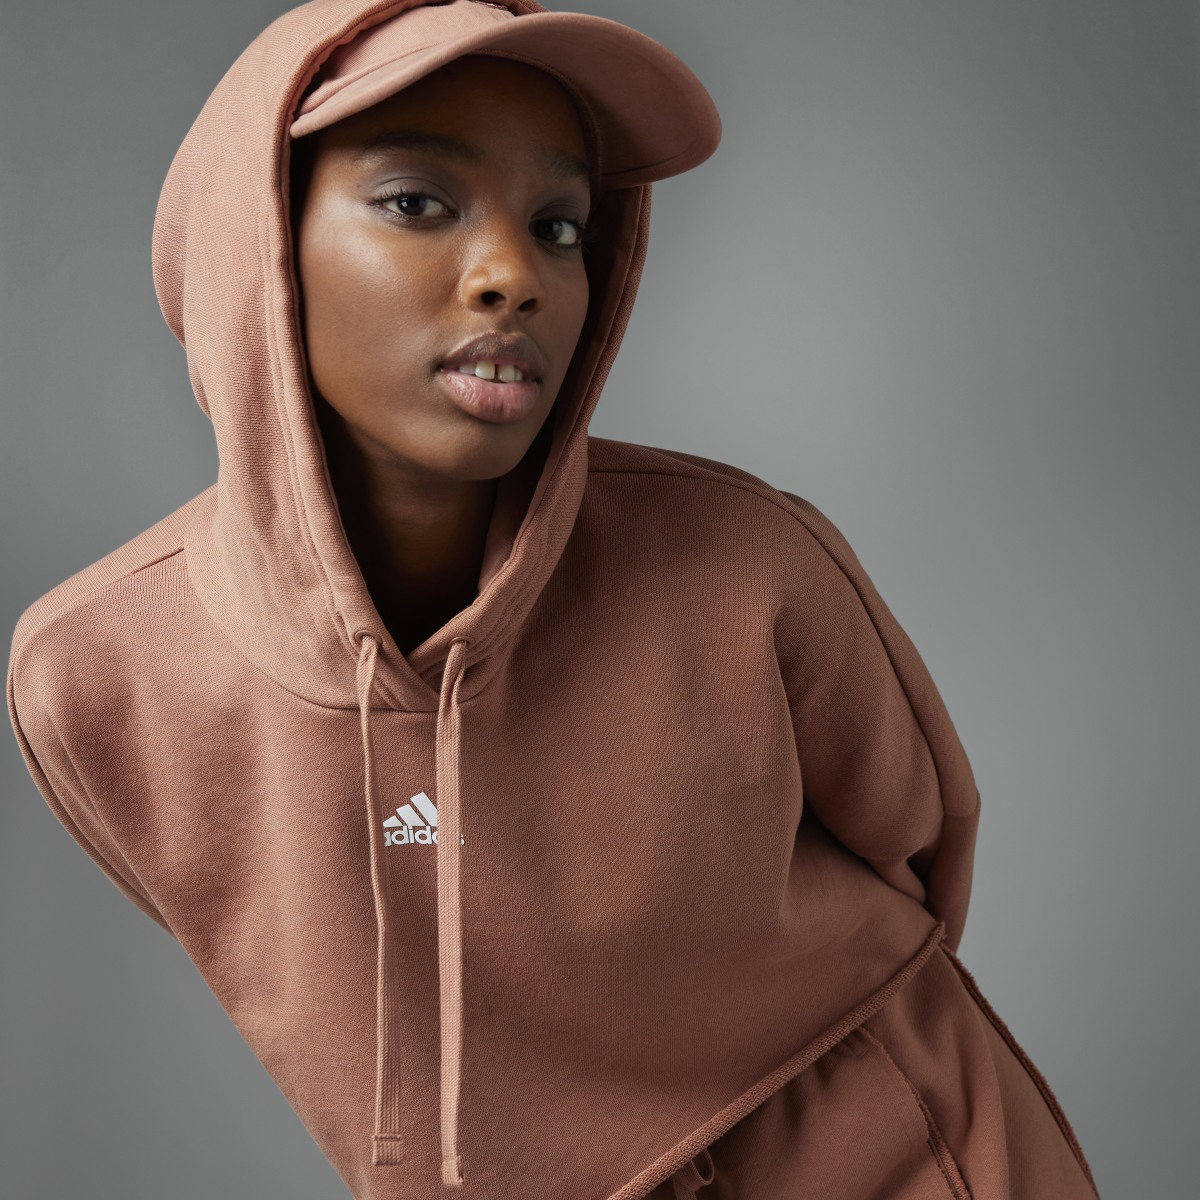 Adidas Collective Power Cropped Hoodie. 4